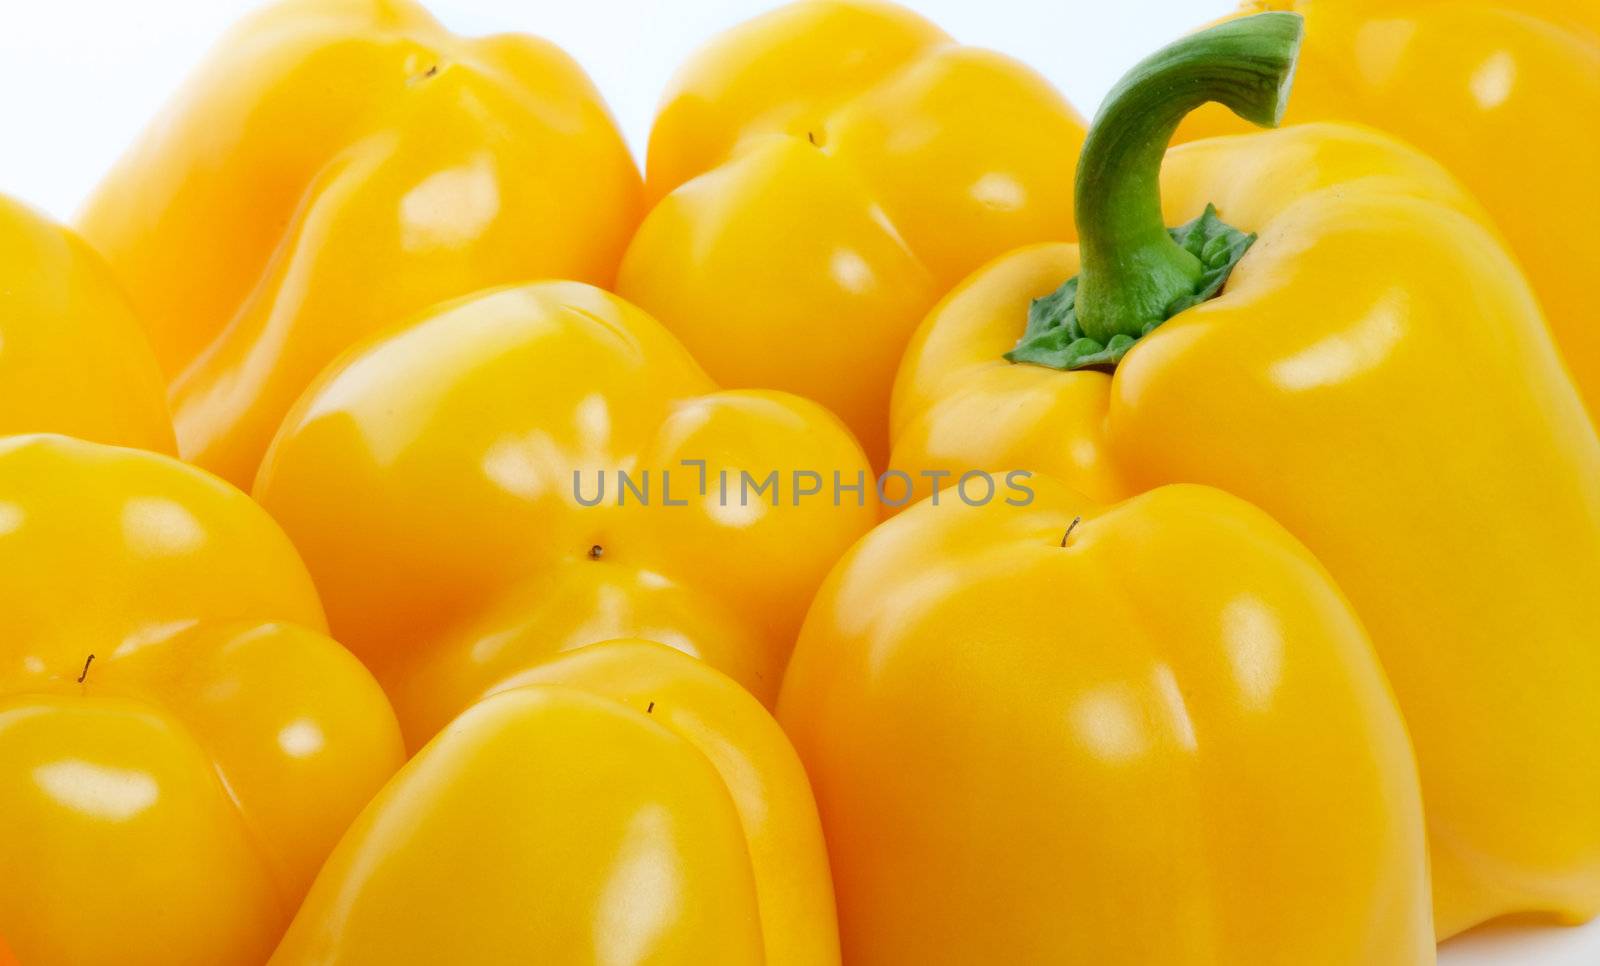 Yellow Bell Peppers close up on white background